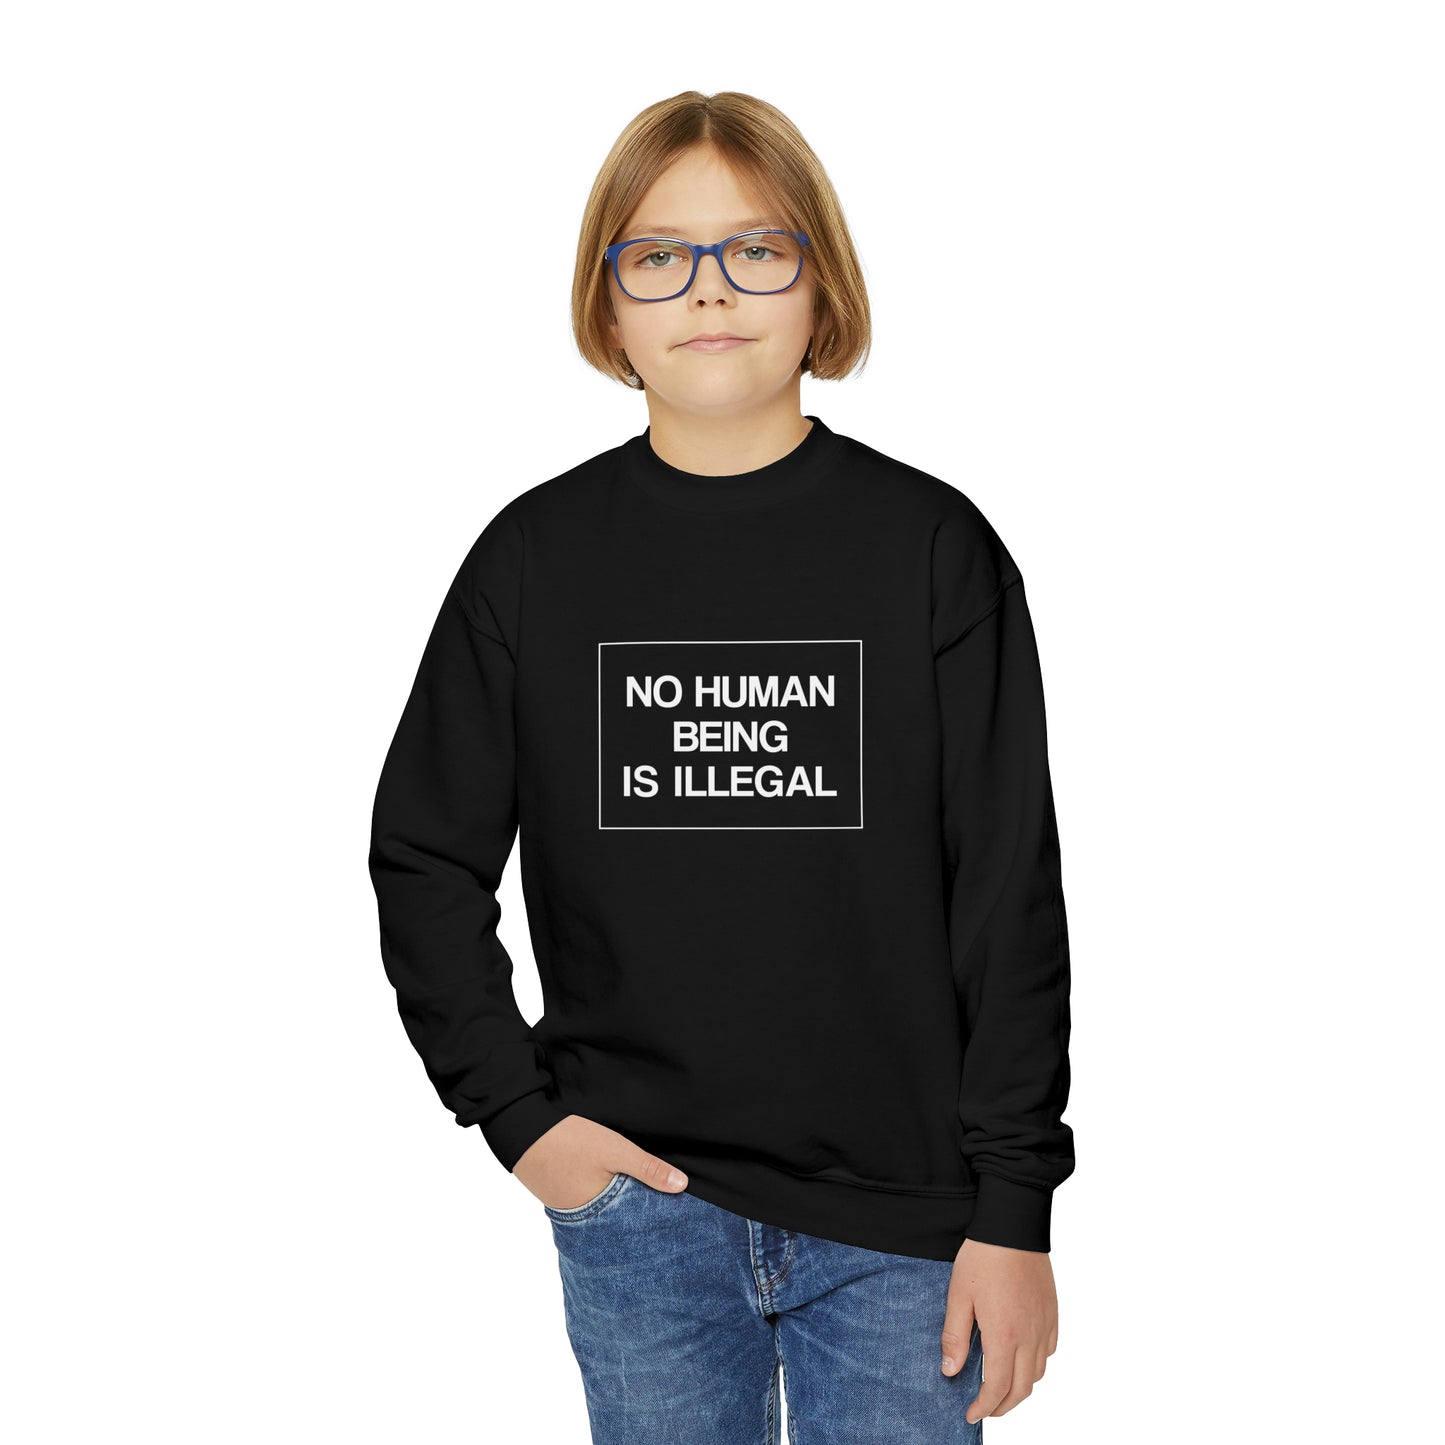 “No Human Being is Illegal” Youth Sweatshirt